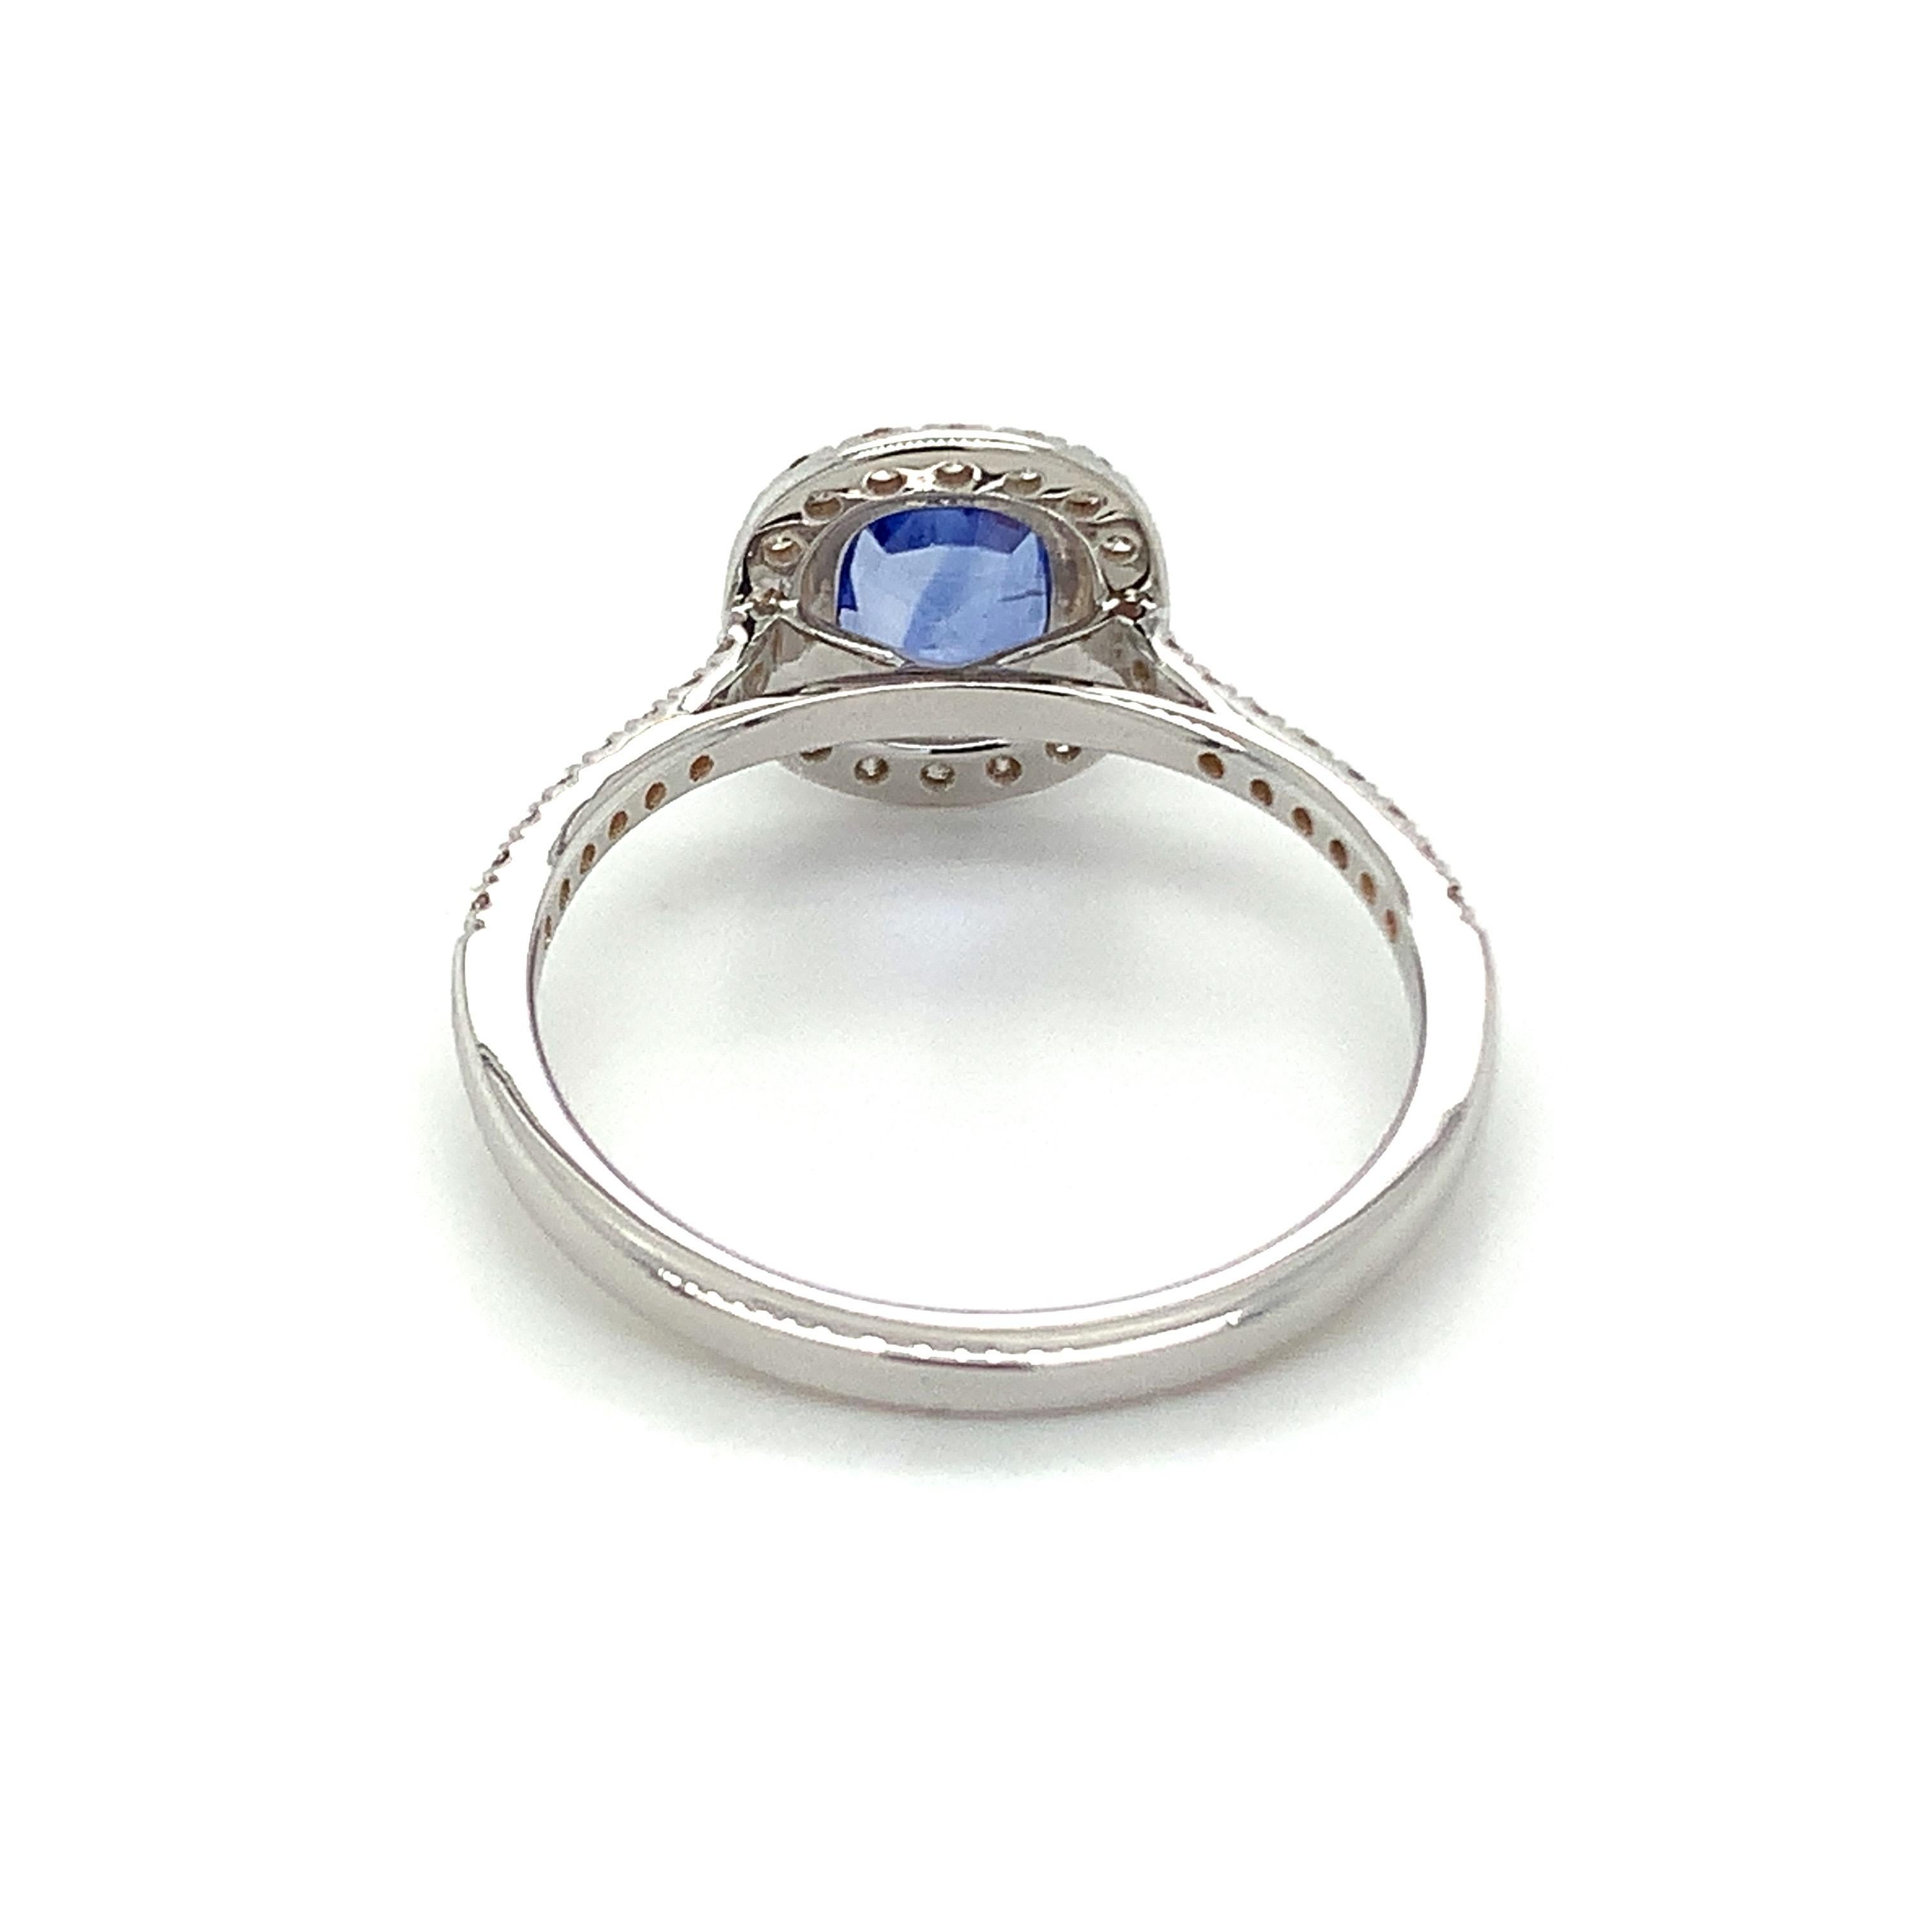 1.00 Carat Cushion Cut Blue Sapphire Ring with Diamonds in 10k White Gold In New Condition For Sale In Fort Lee, NJ